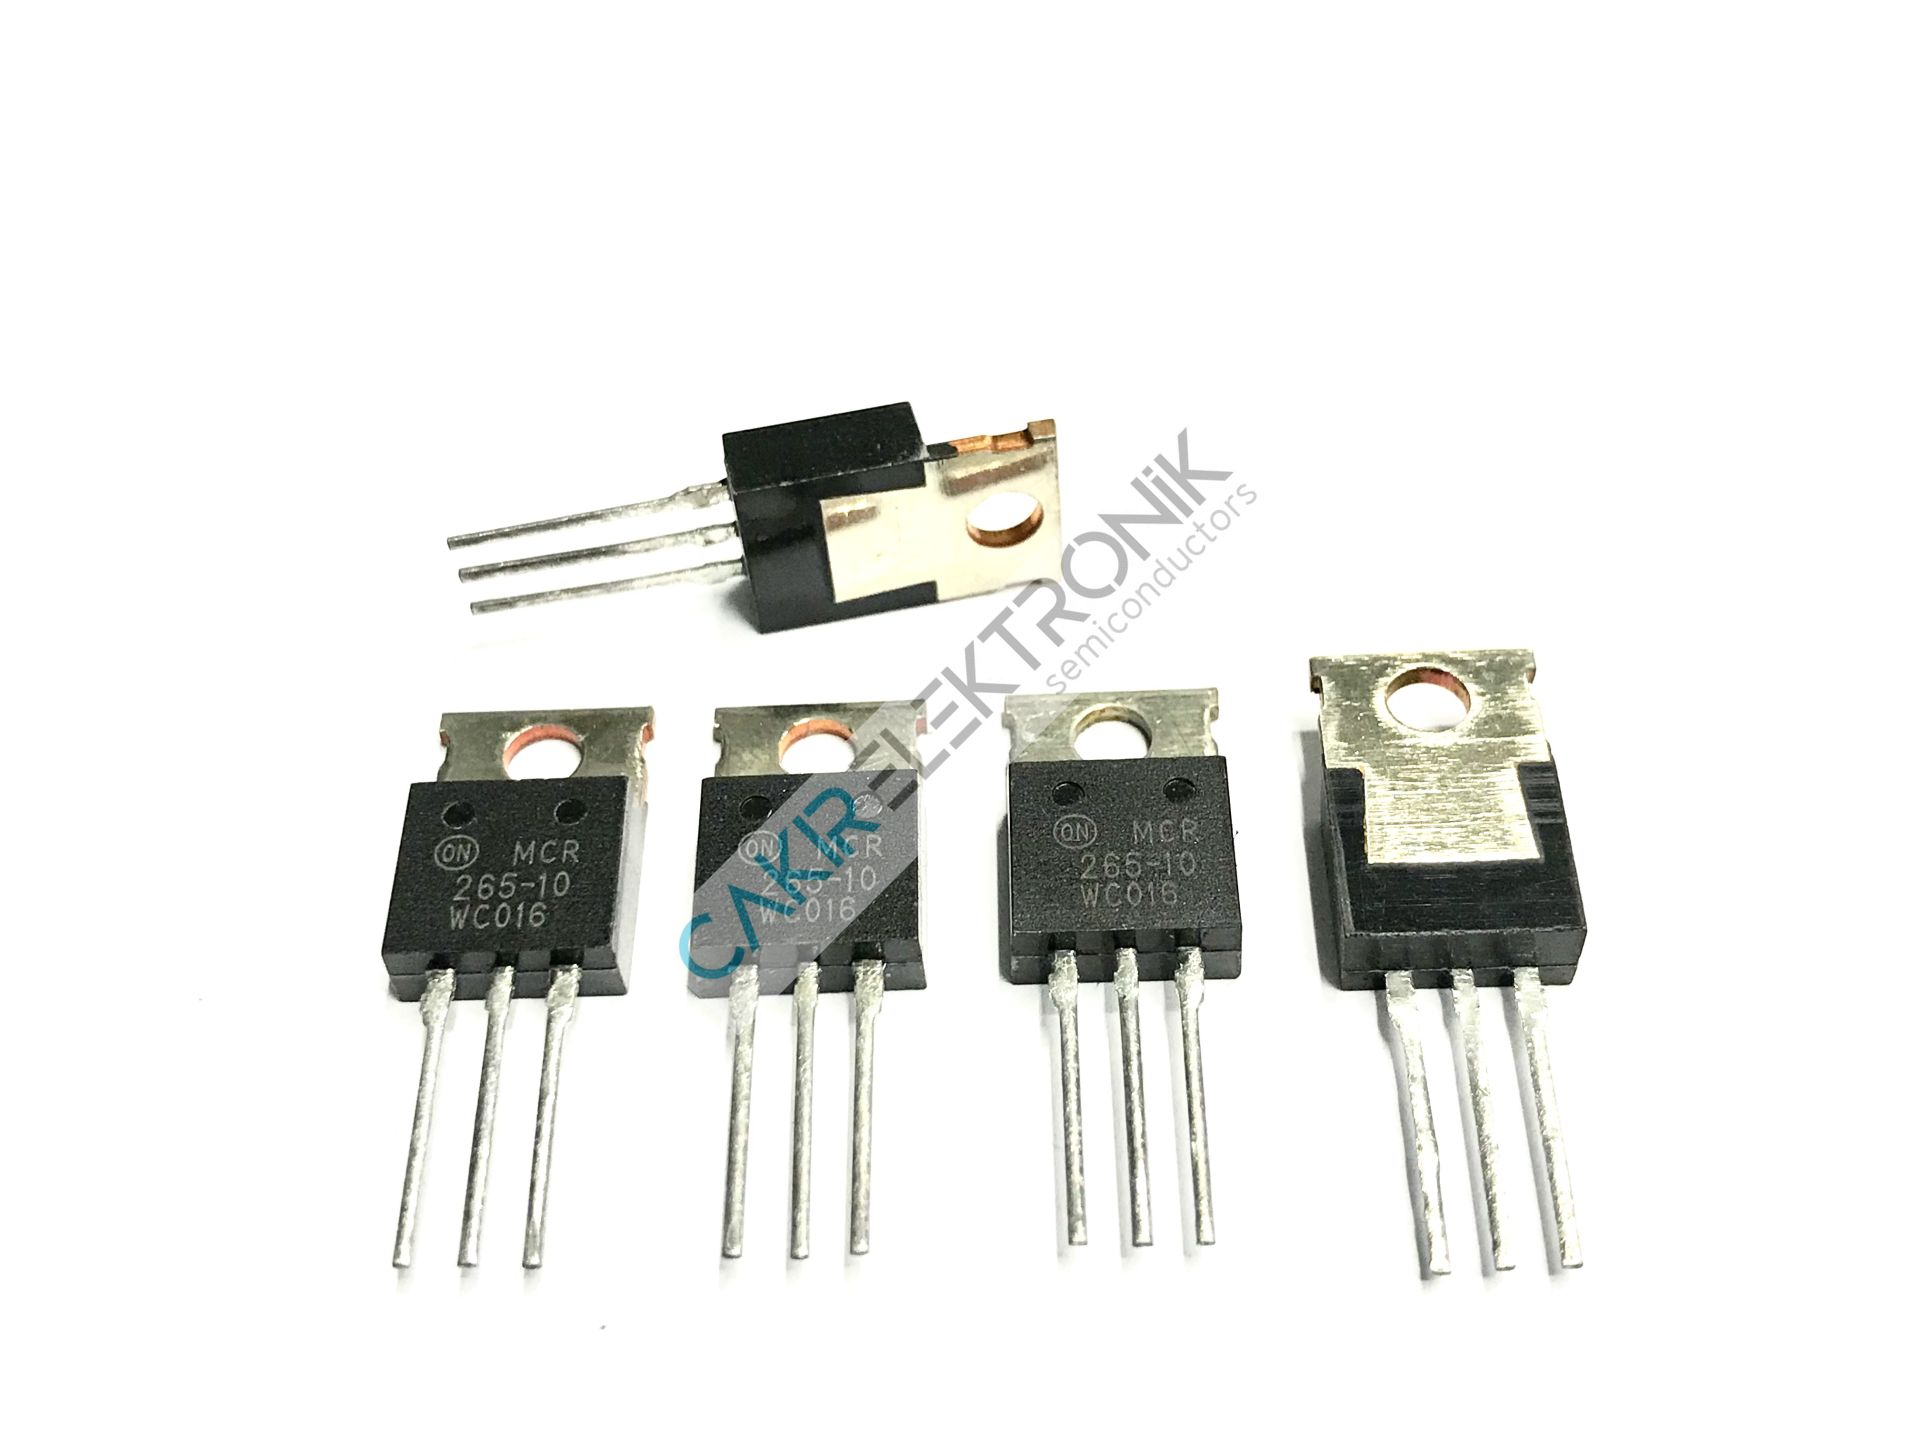 MCR265-10 - 55A. 800V. Silicon Controlled Rectifiers